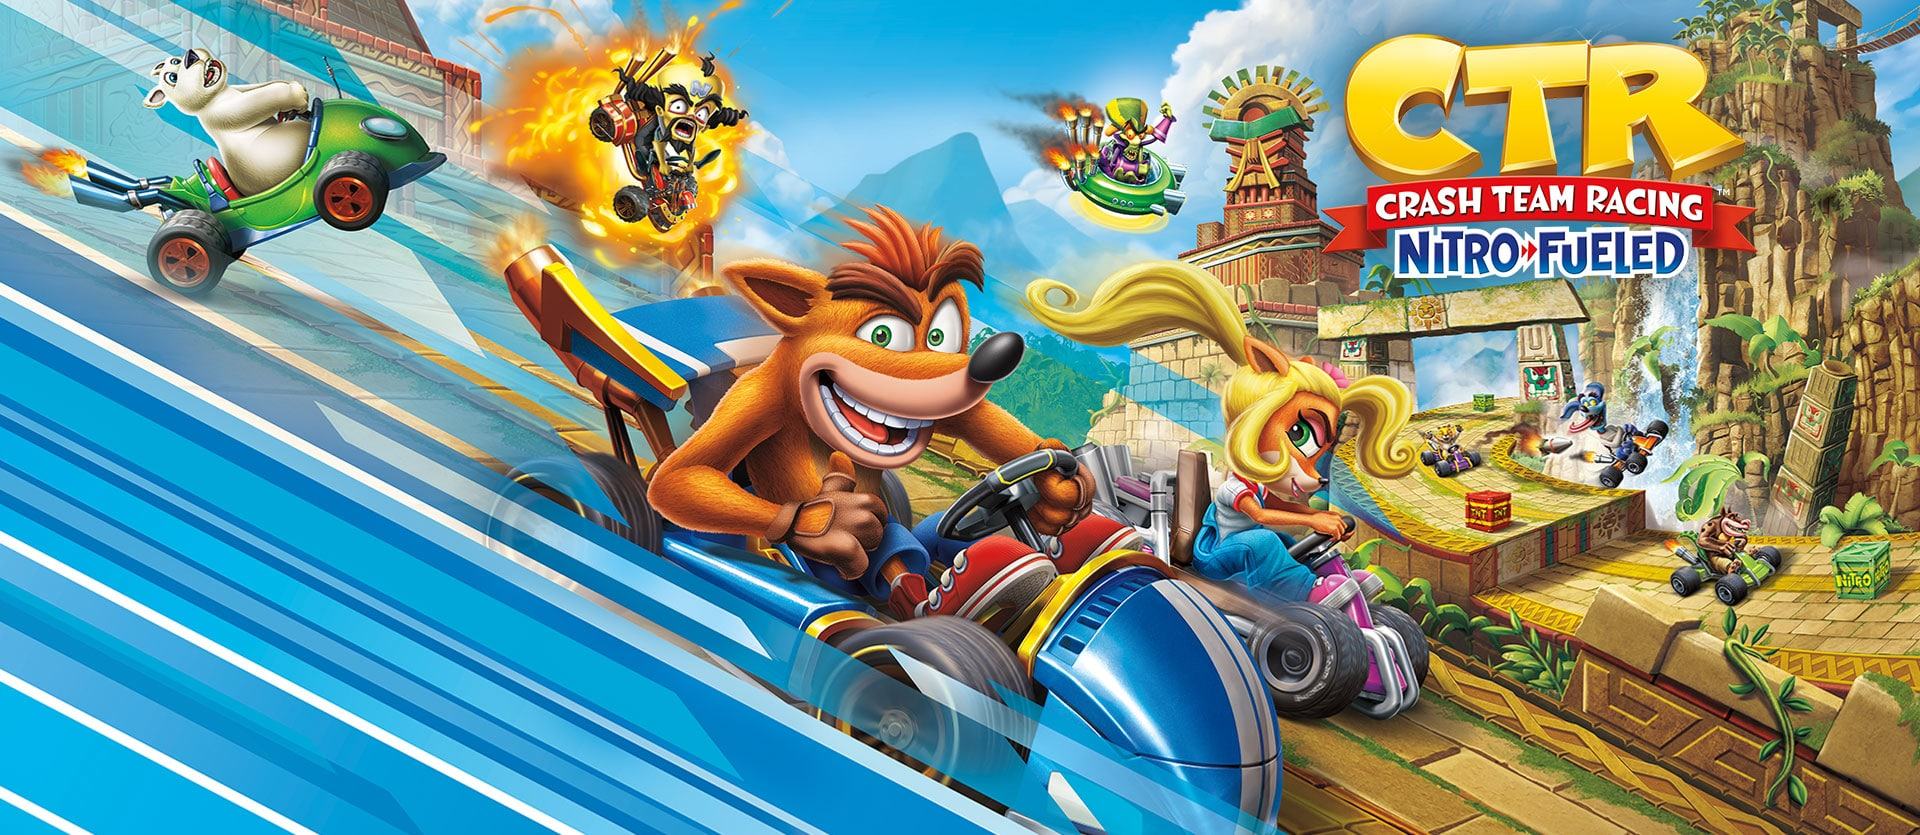 ctr remastered